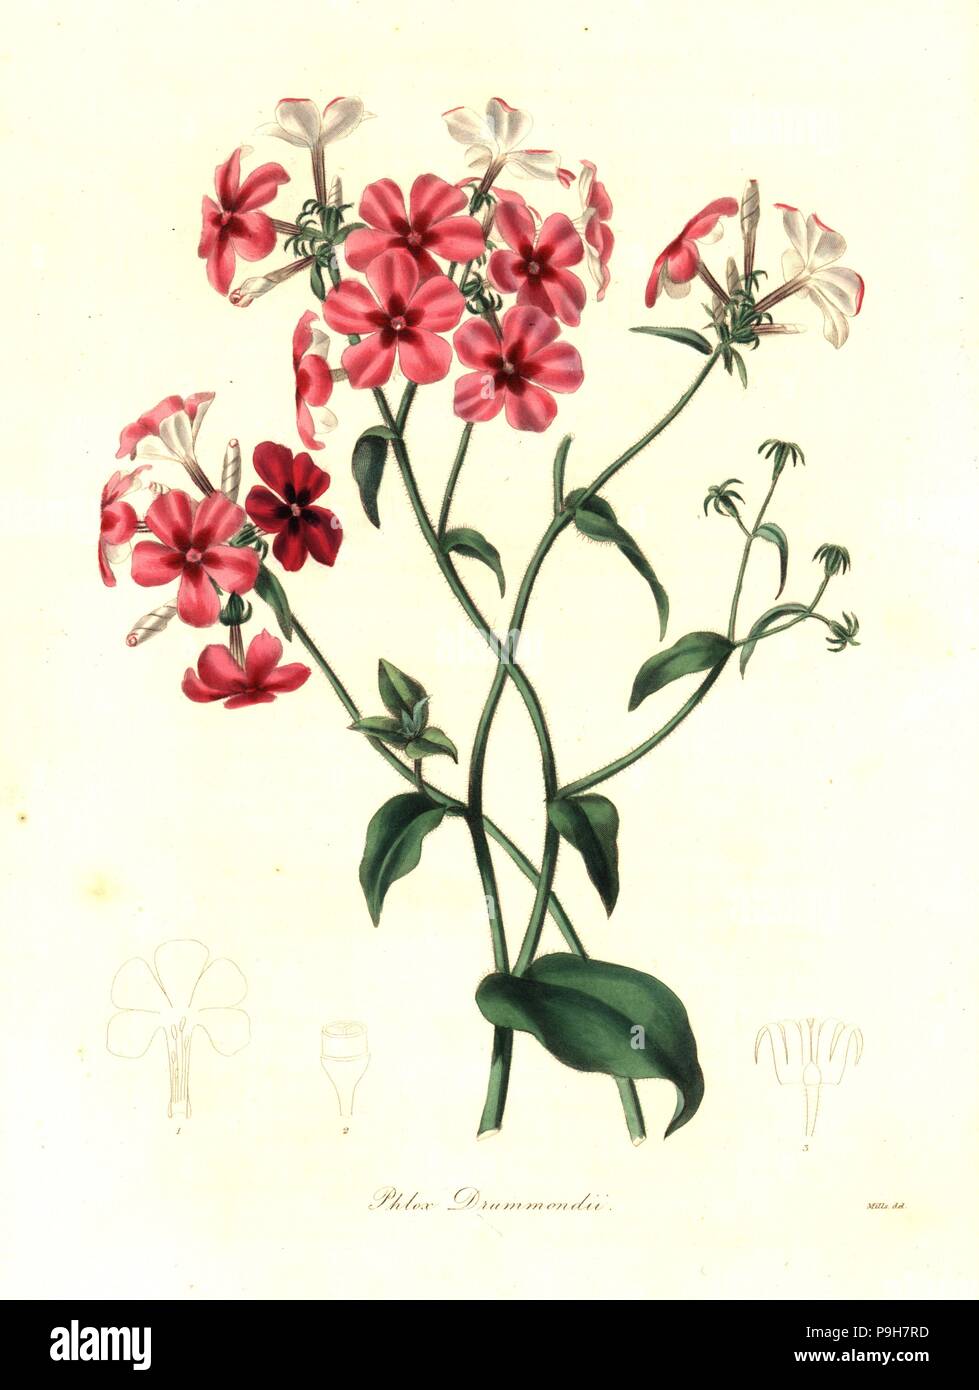 Drummond's phlox, Phlox drummondii. Handcoloured copperplate engraving by Watts after a botanical illustration by Mills from Benjamin Maund and the Rev. John Stevens Henslow's The Botanist, London, 1836. Stock Photo